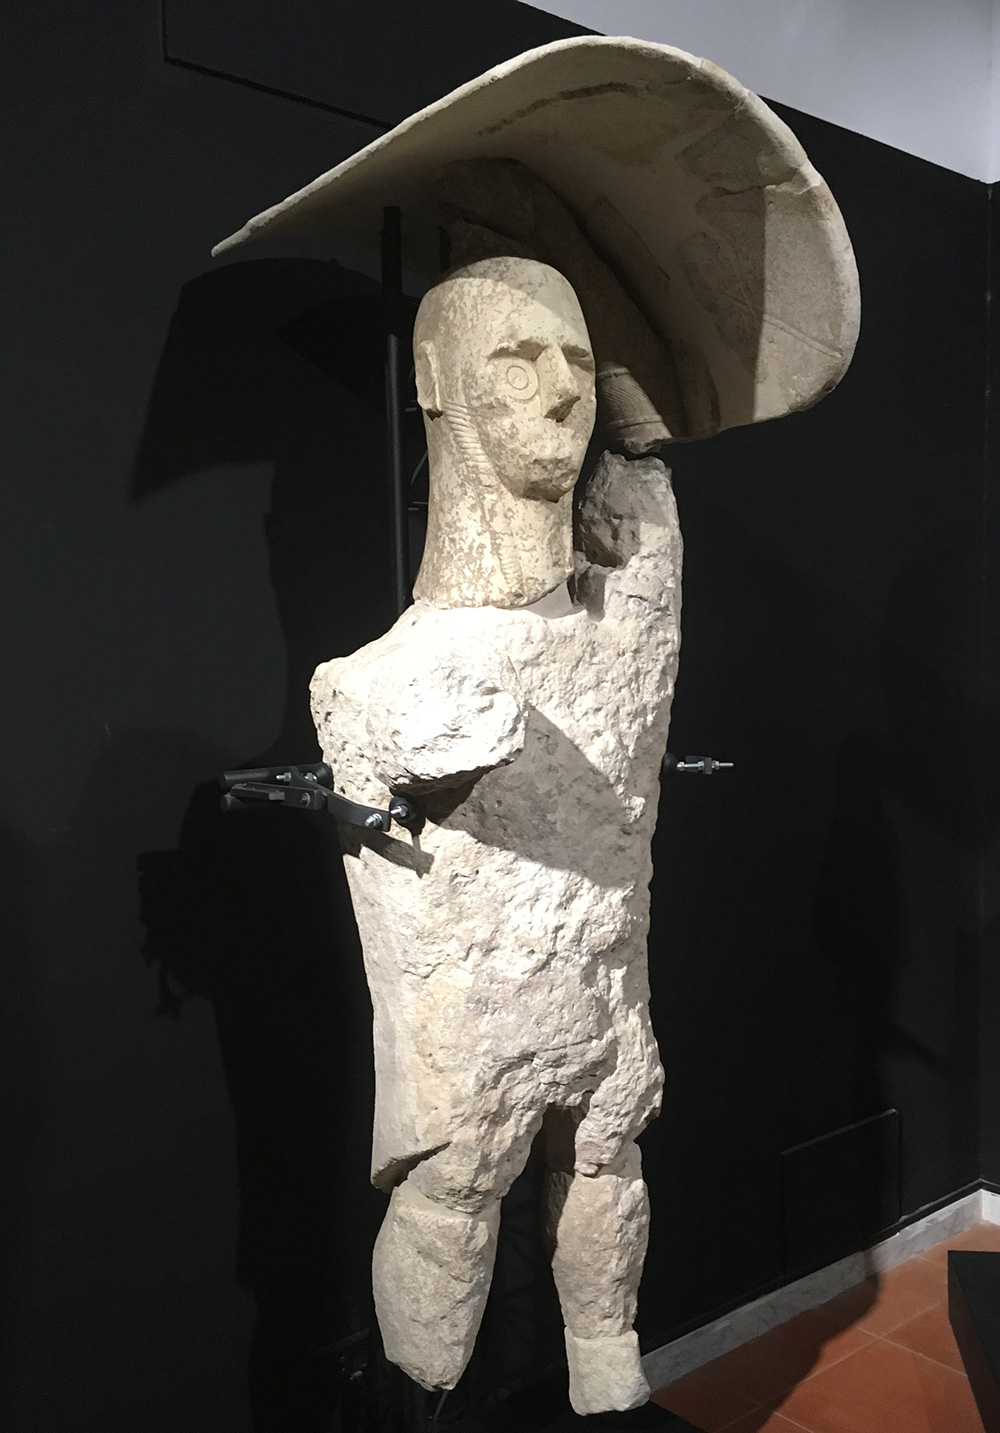 The Giants of Mont’e Prama on display in the Civic Museum of Cabras - the 